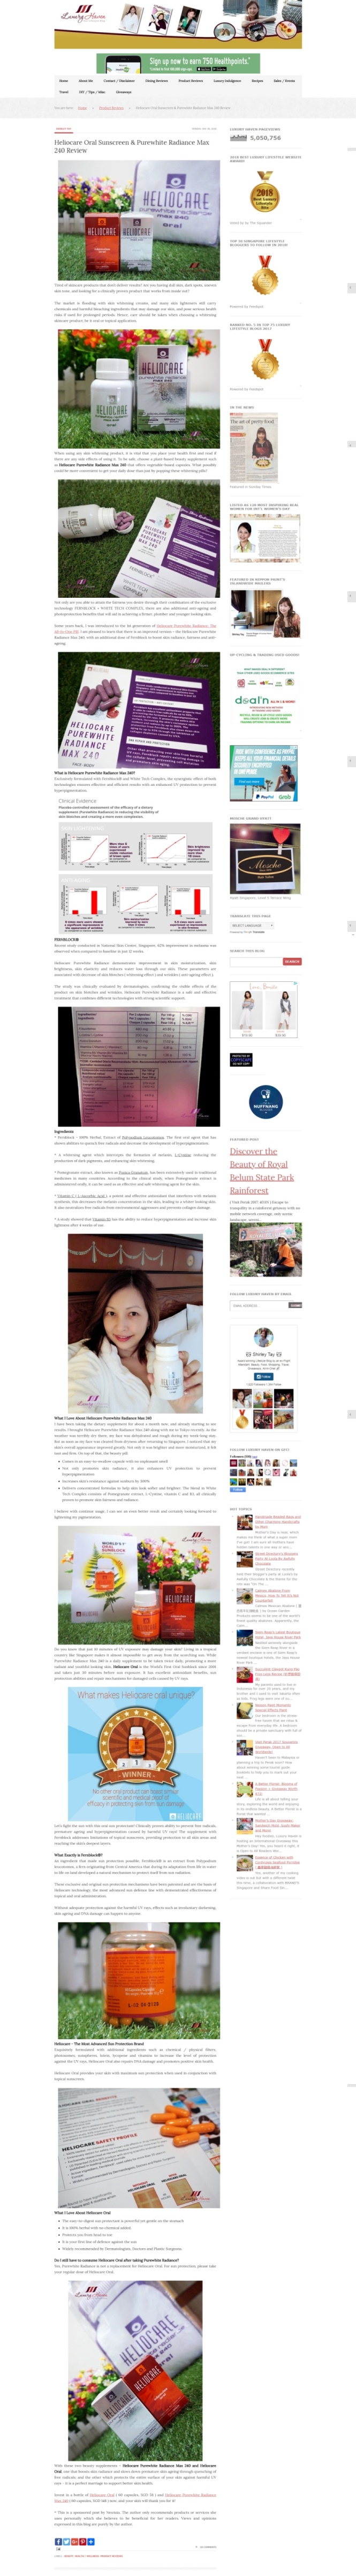 20180528 - Shirley Tay - Blog review PWRM